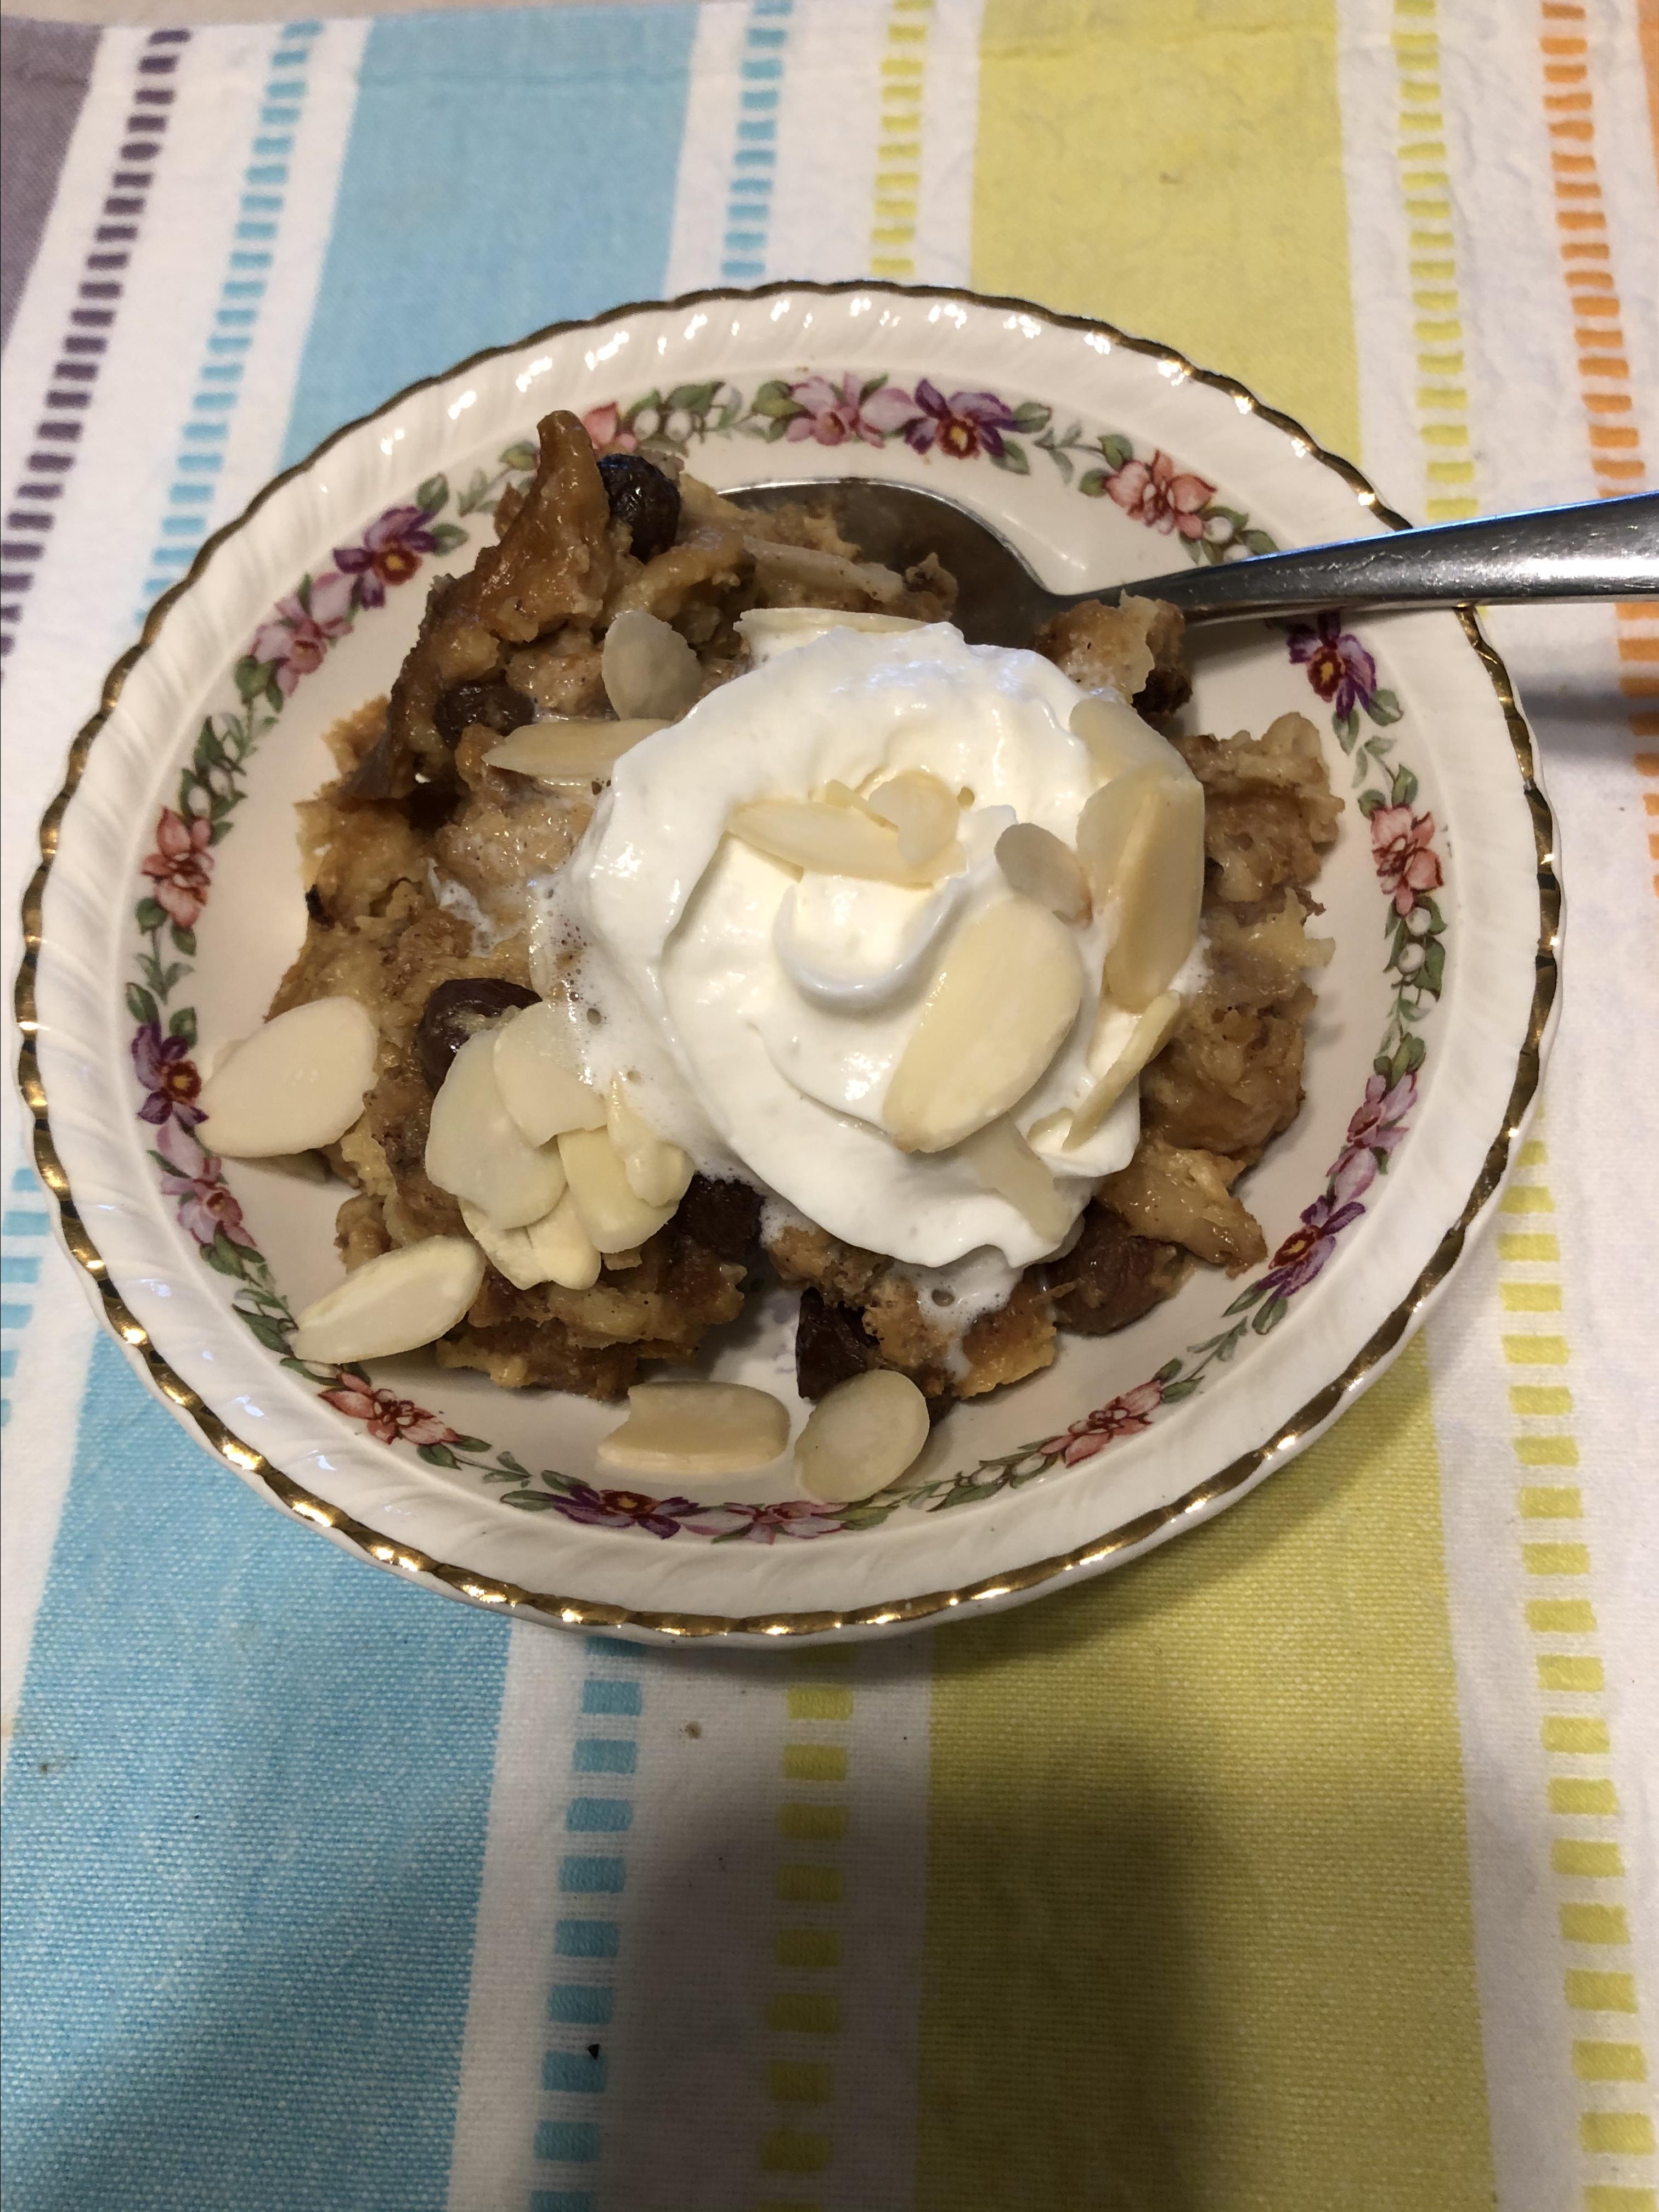 Bread Pudding in the Slow Cooker 